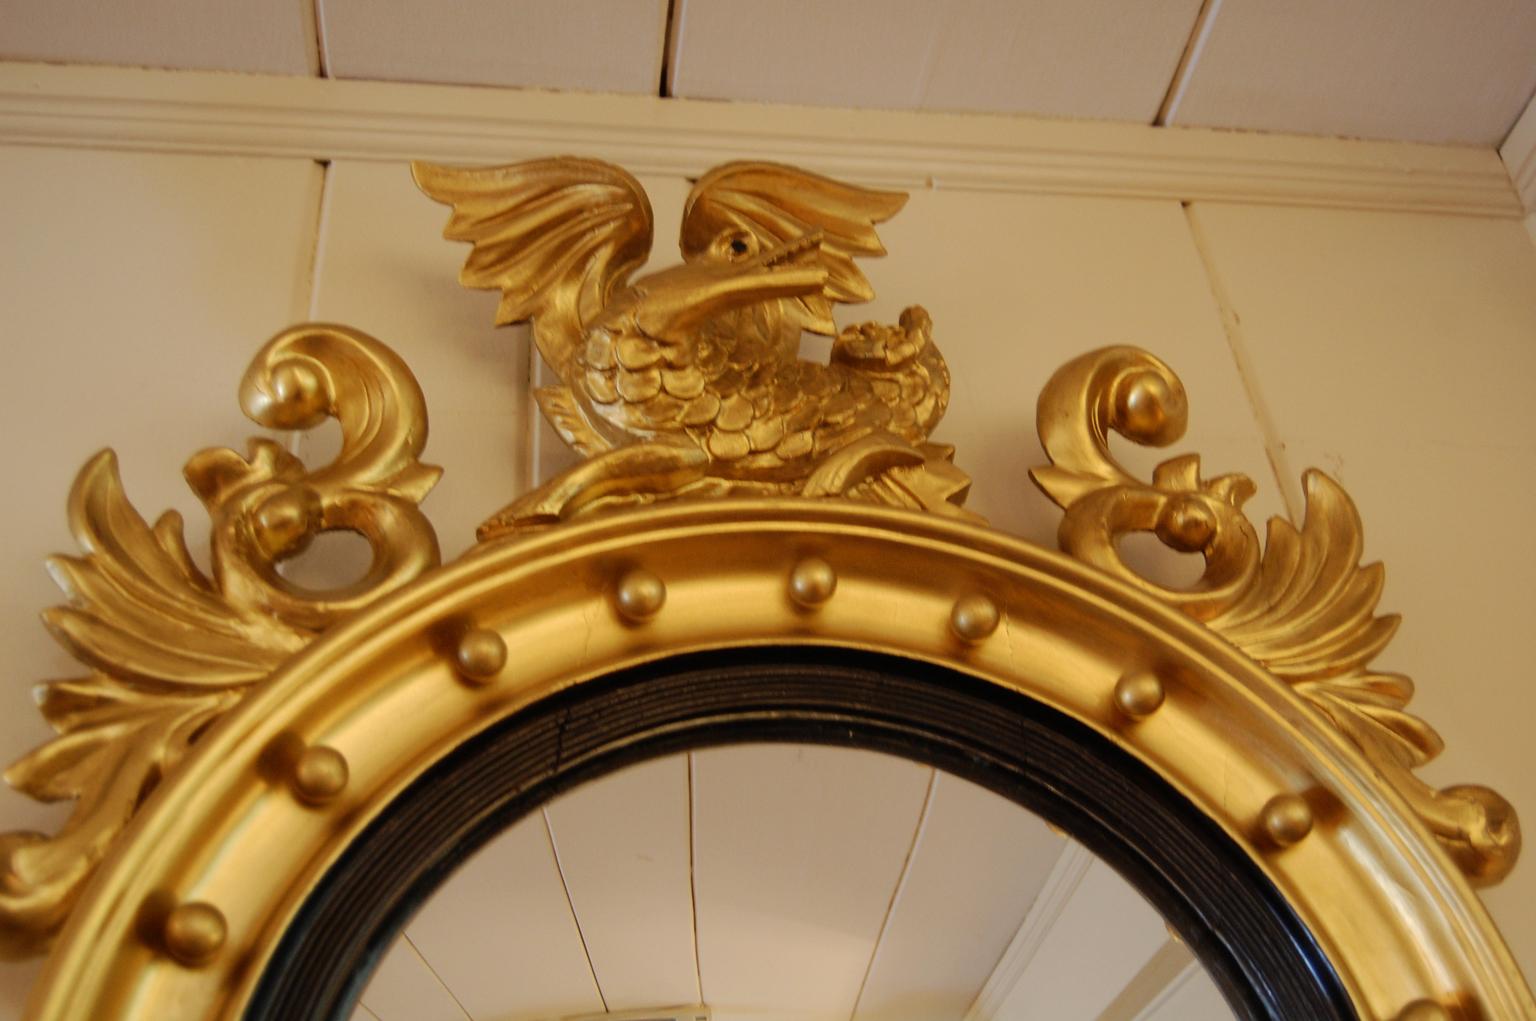 Welsh convex gilt mirror with the symbol of Wales, the winged dragon (sometimes called the dragon of Cadwalader